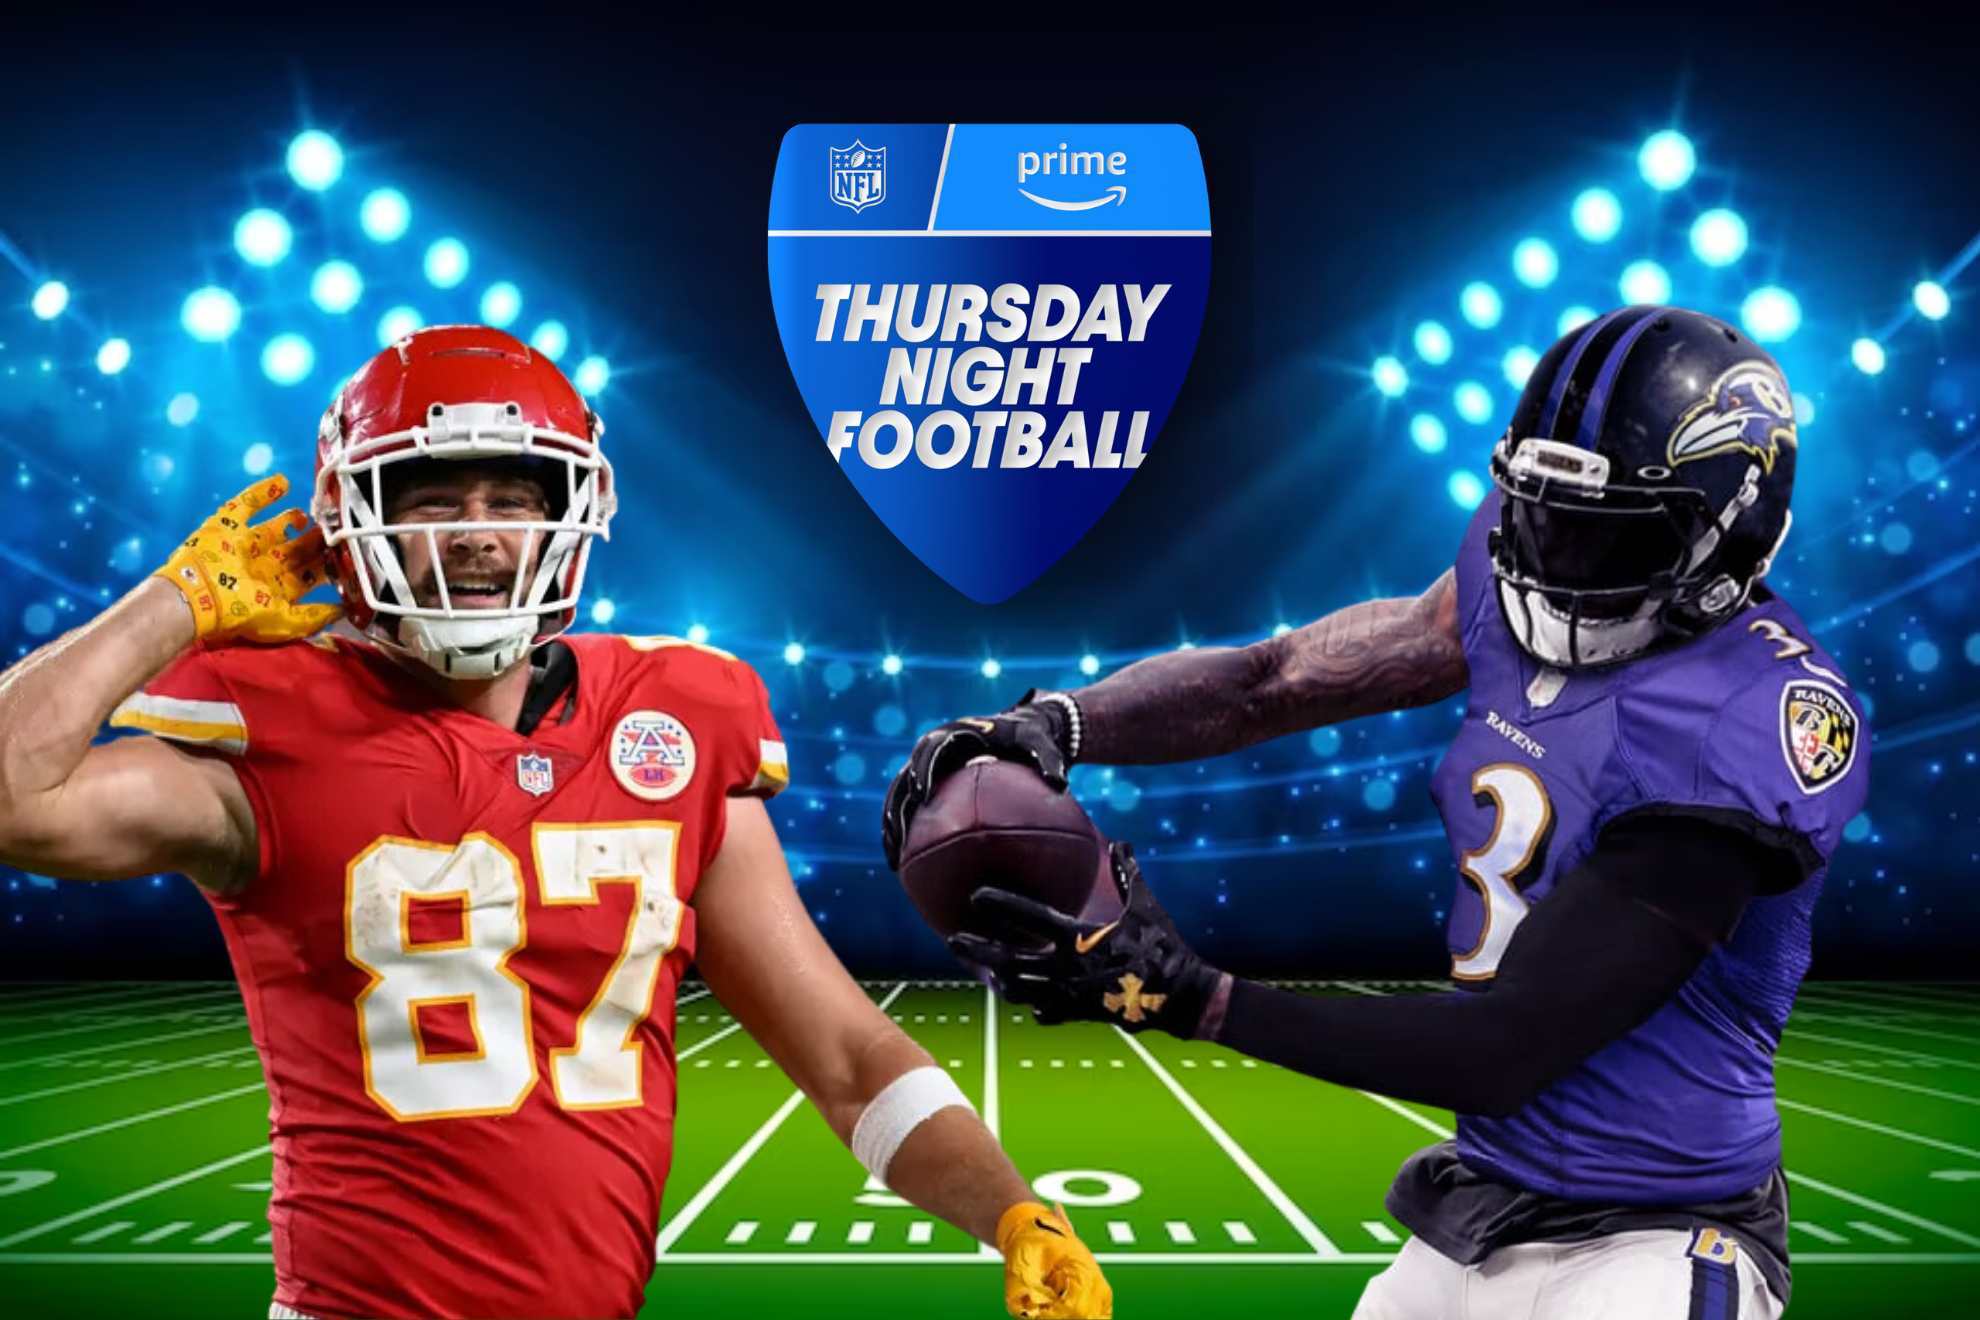 who plays today in thursday night football